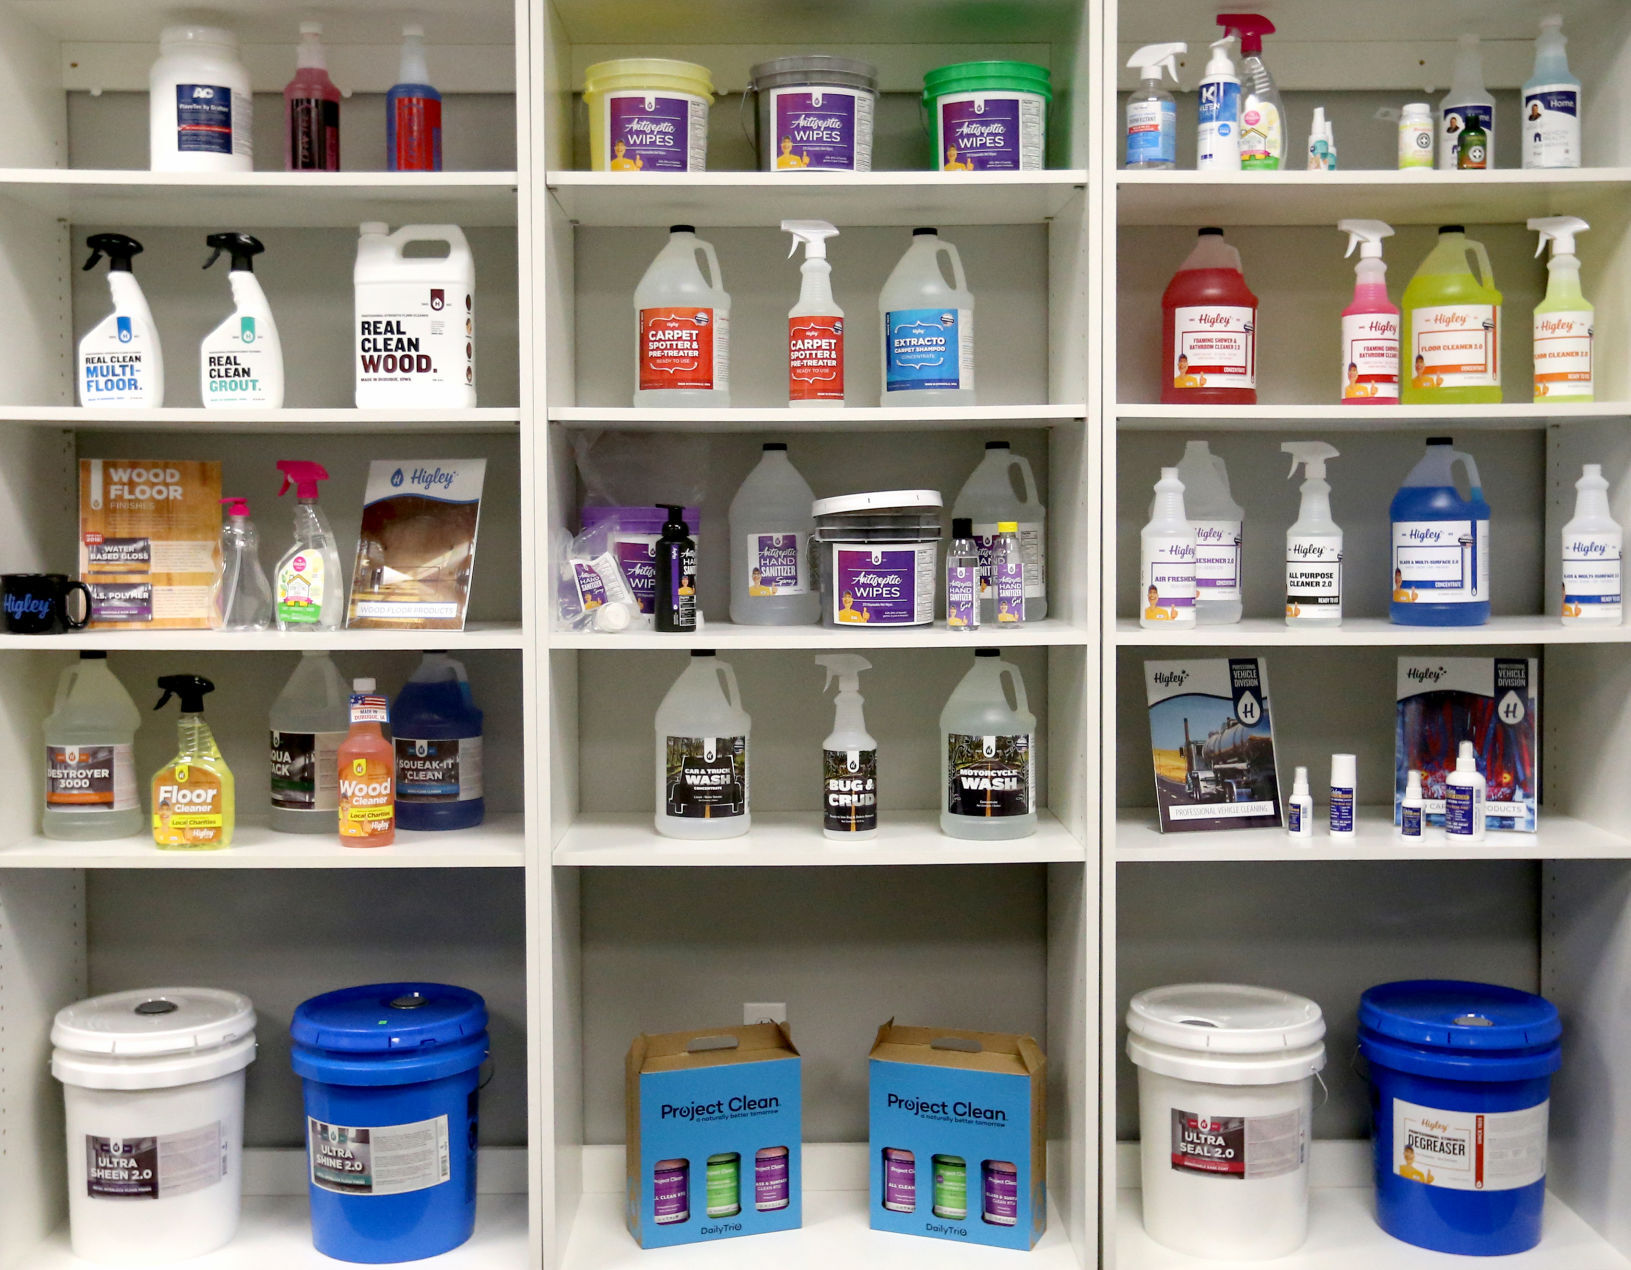 Products at Higley Industries in Dyersville, Iowa.    PHOTO CREDIT: JESSICA REILLY